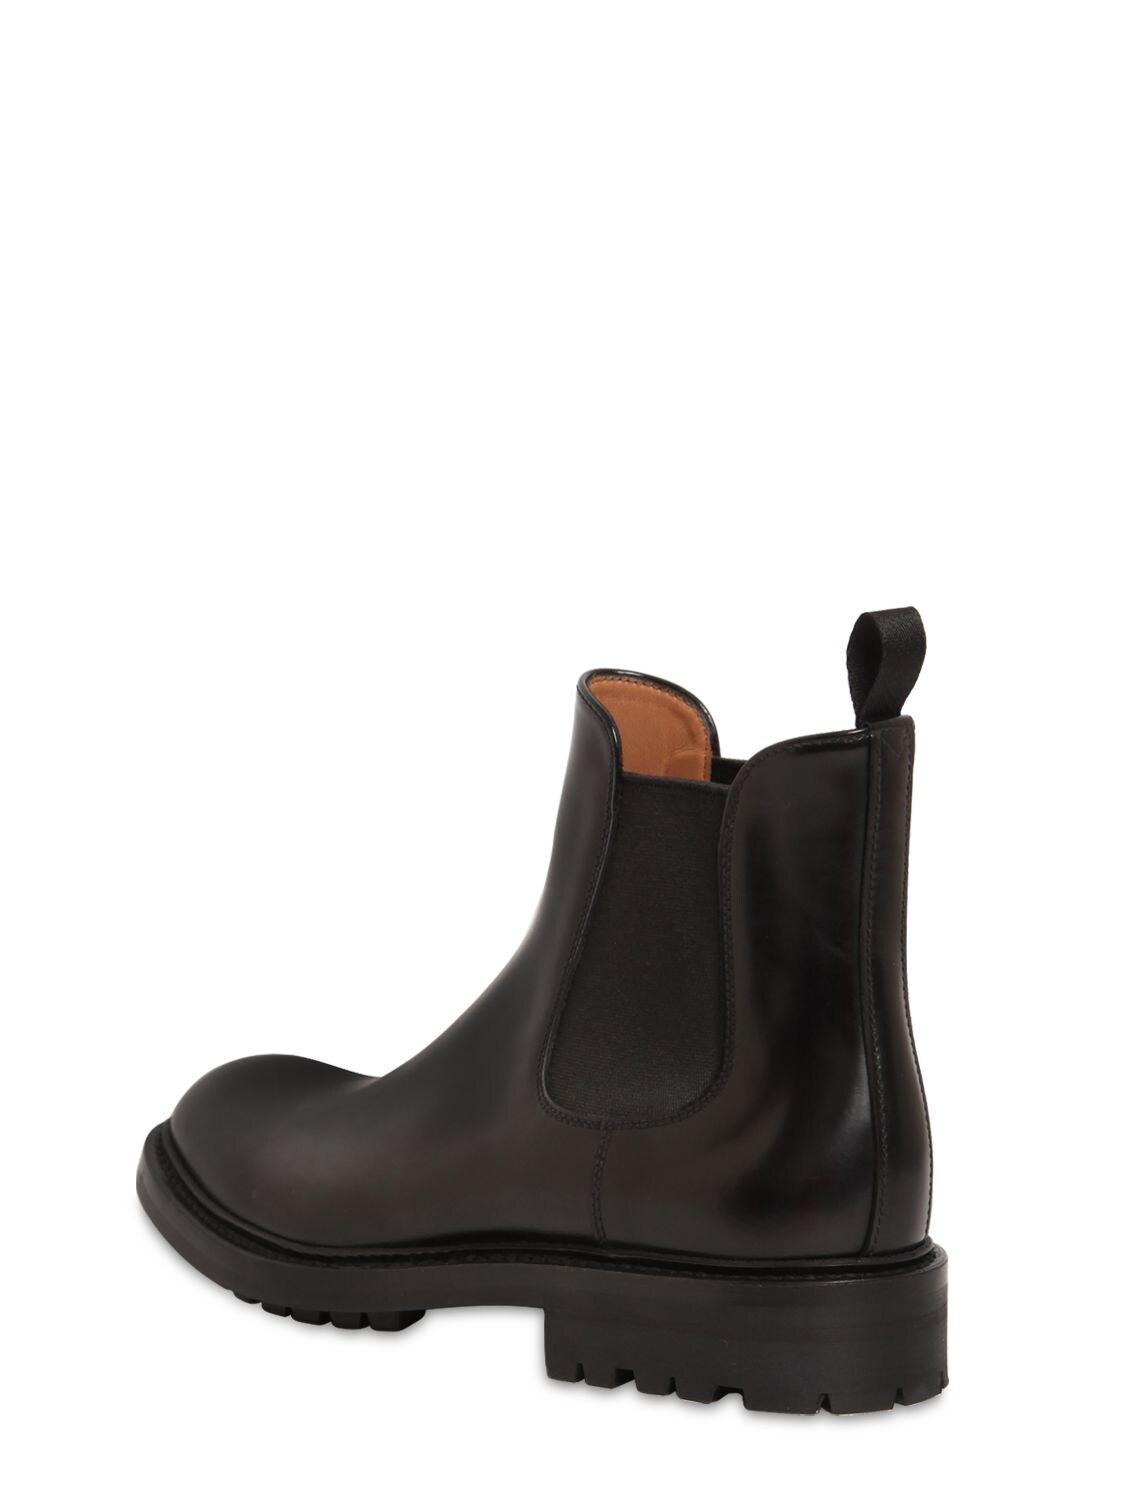 Church's 20mm Genie Brushed Leather Boots in Black - Lyst